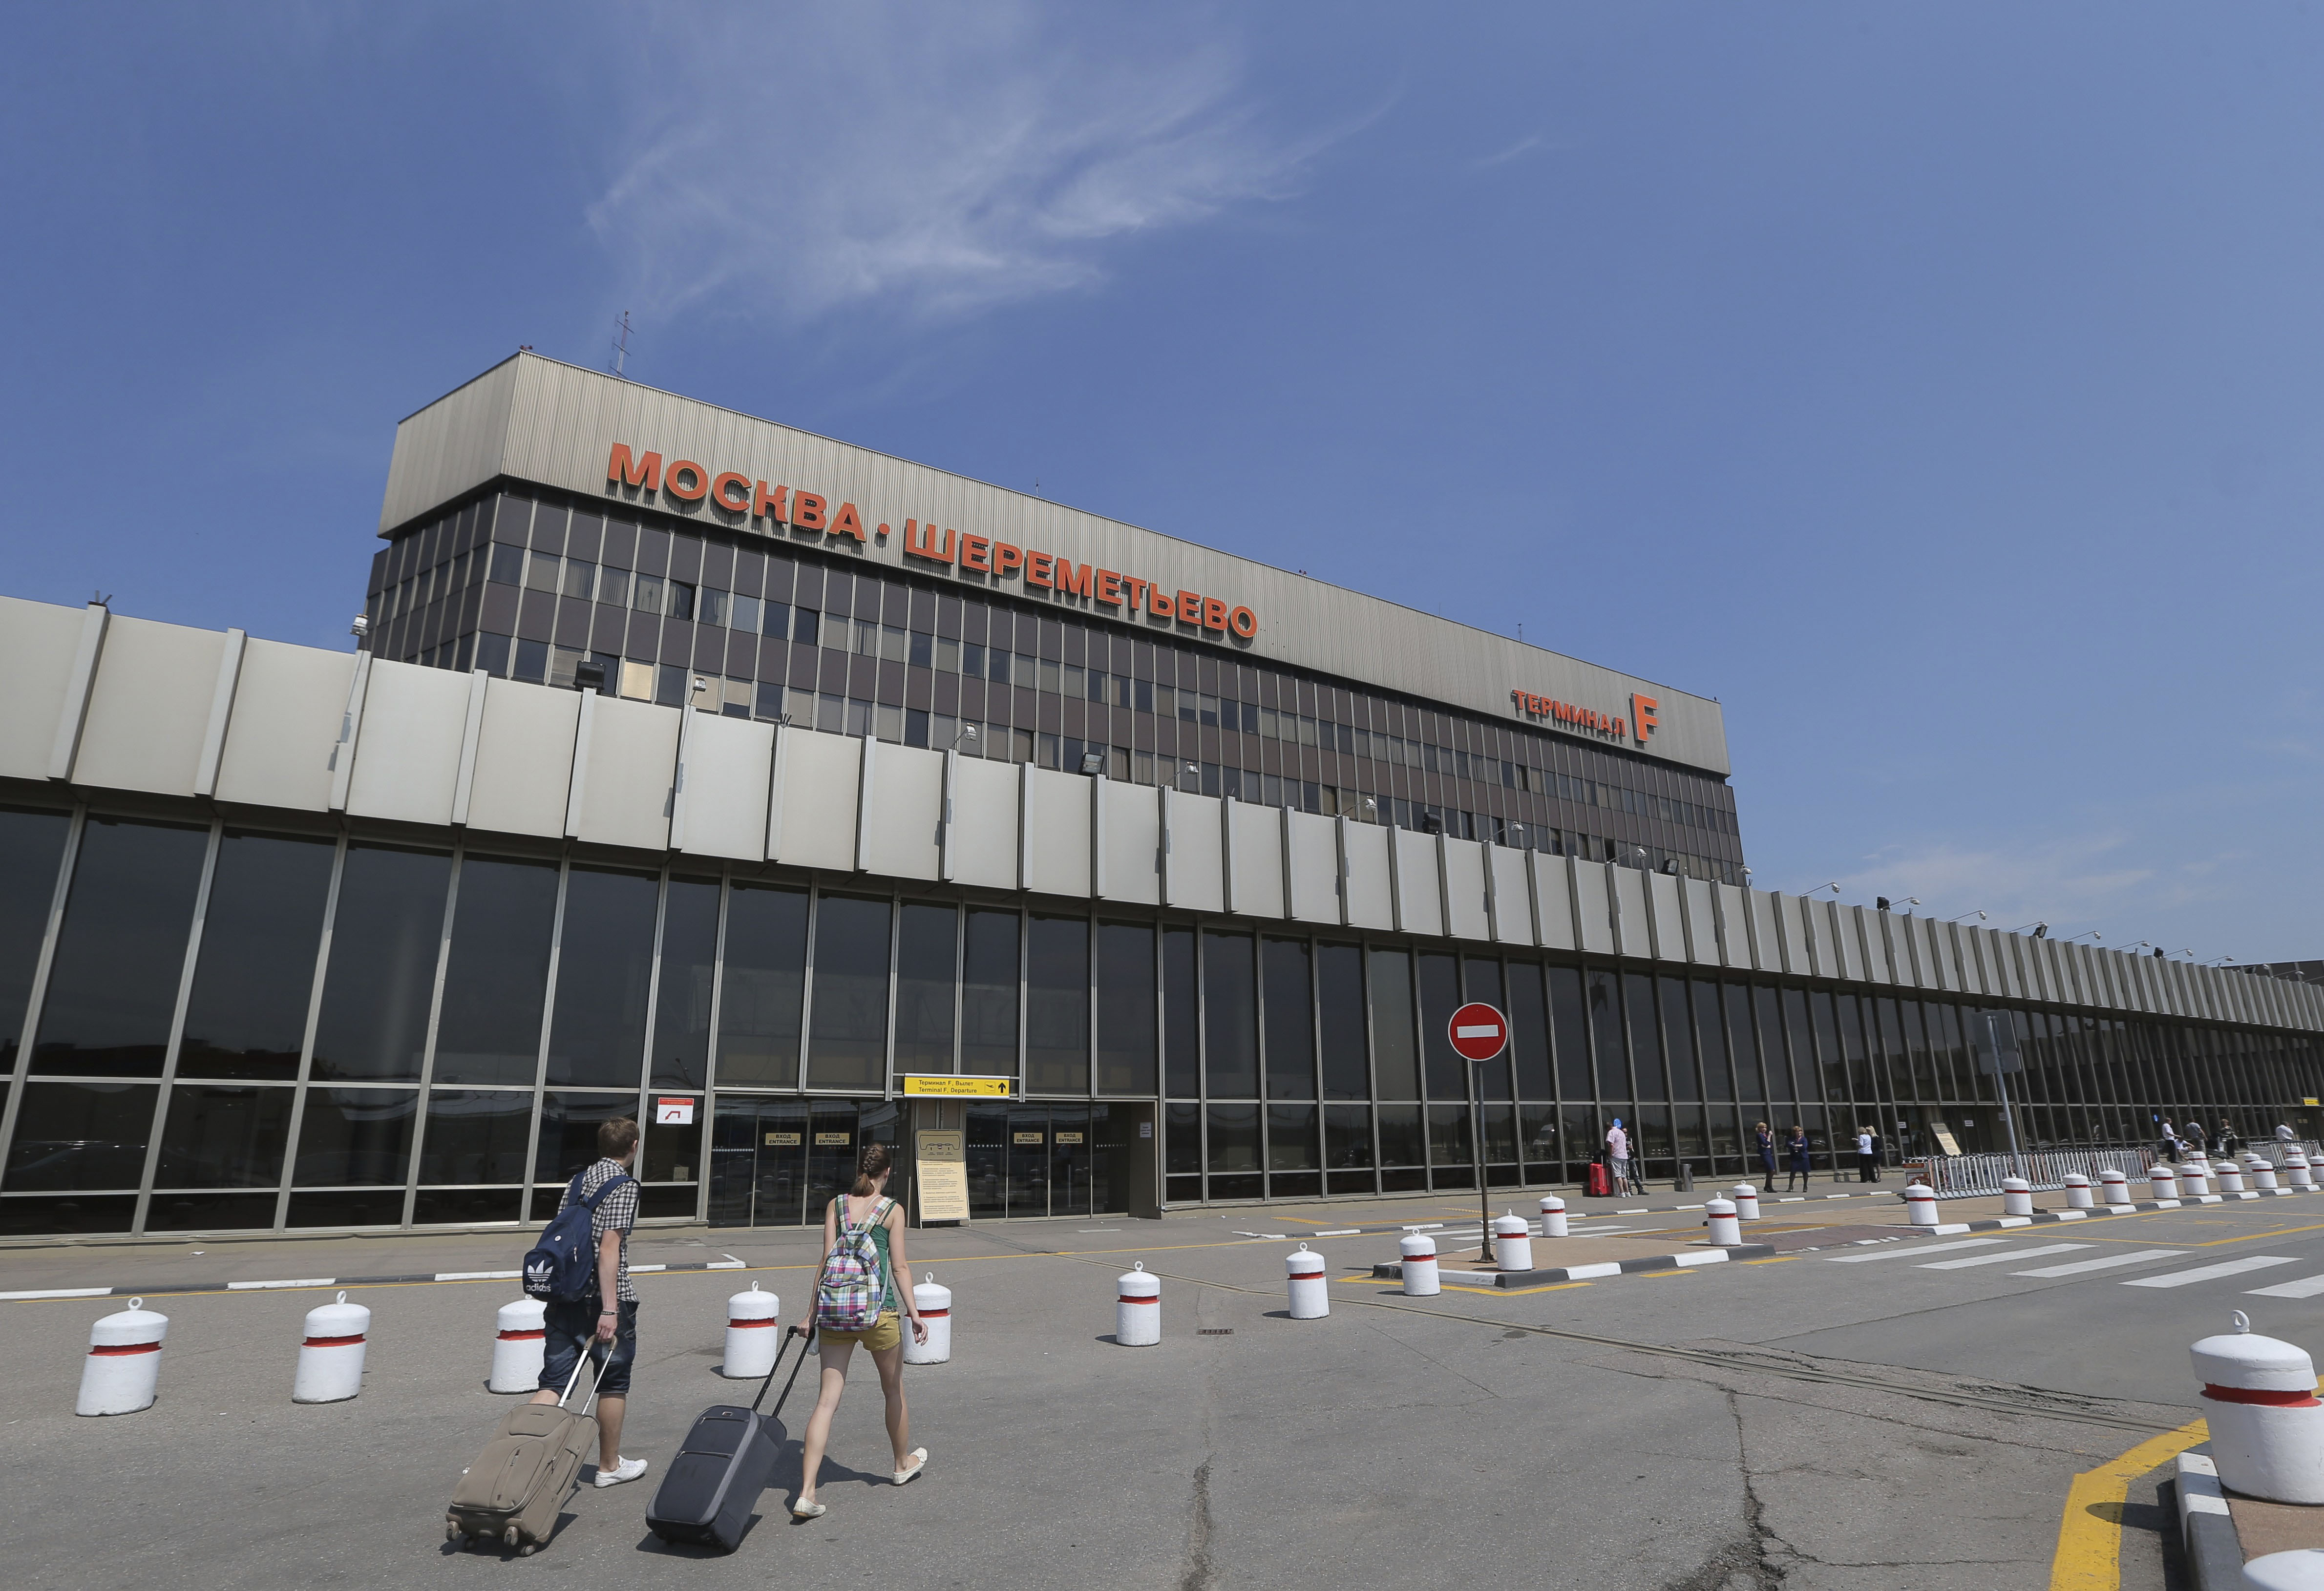 Edward Snowden is still holed up in Moscow's Sheremetyevo airport. Photo: AP